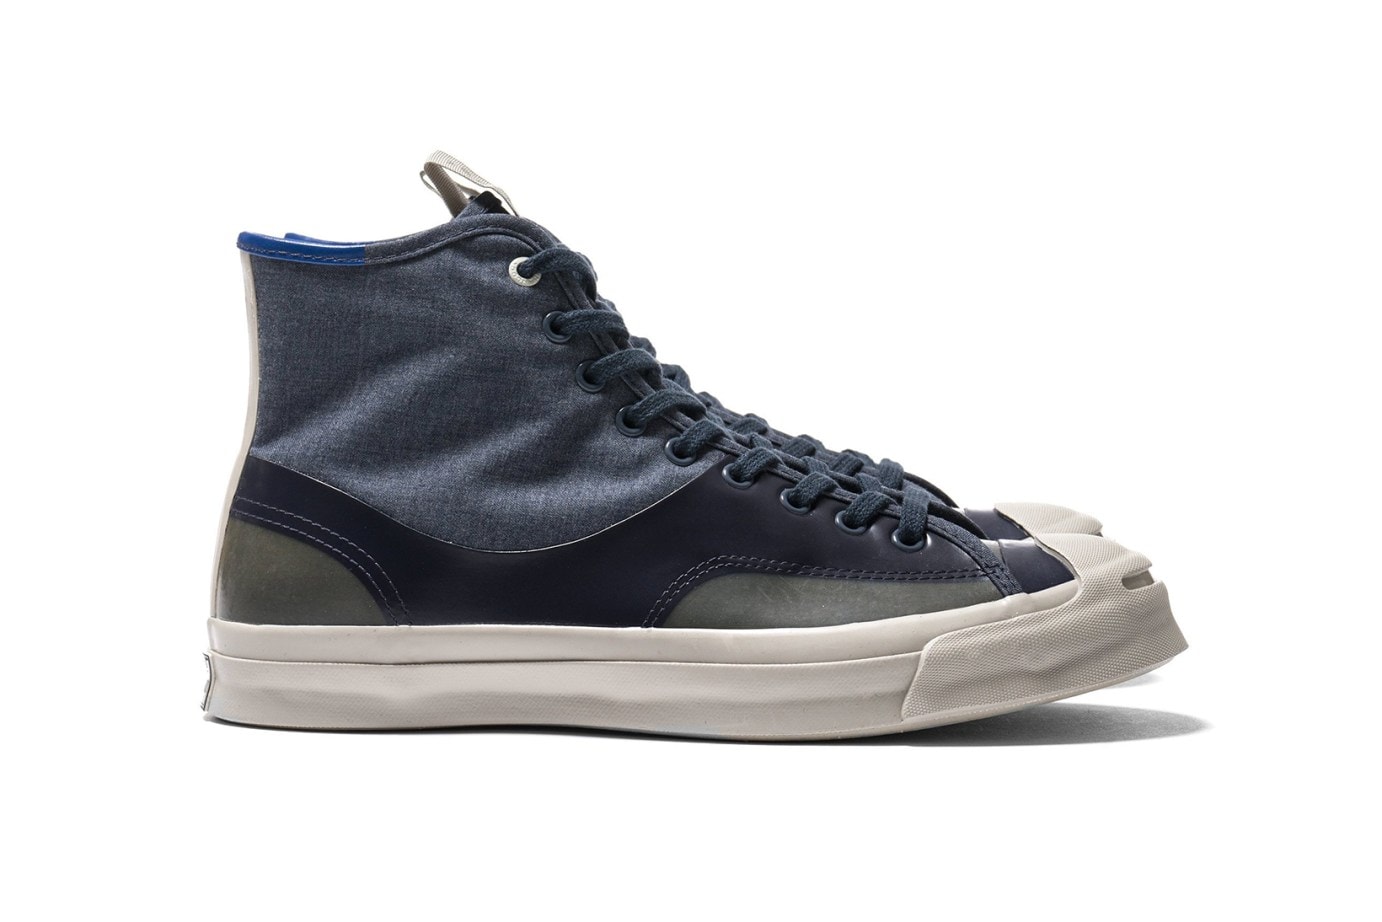 Hancock x Converse Jack Purcell Signature Mid “Airforce” & “Oatmeal”